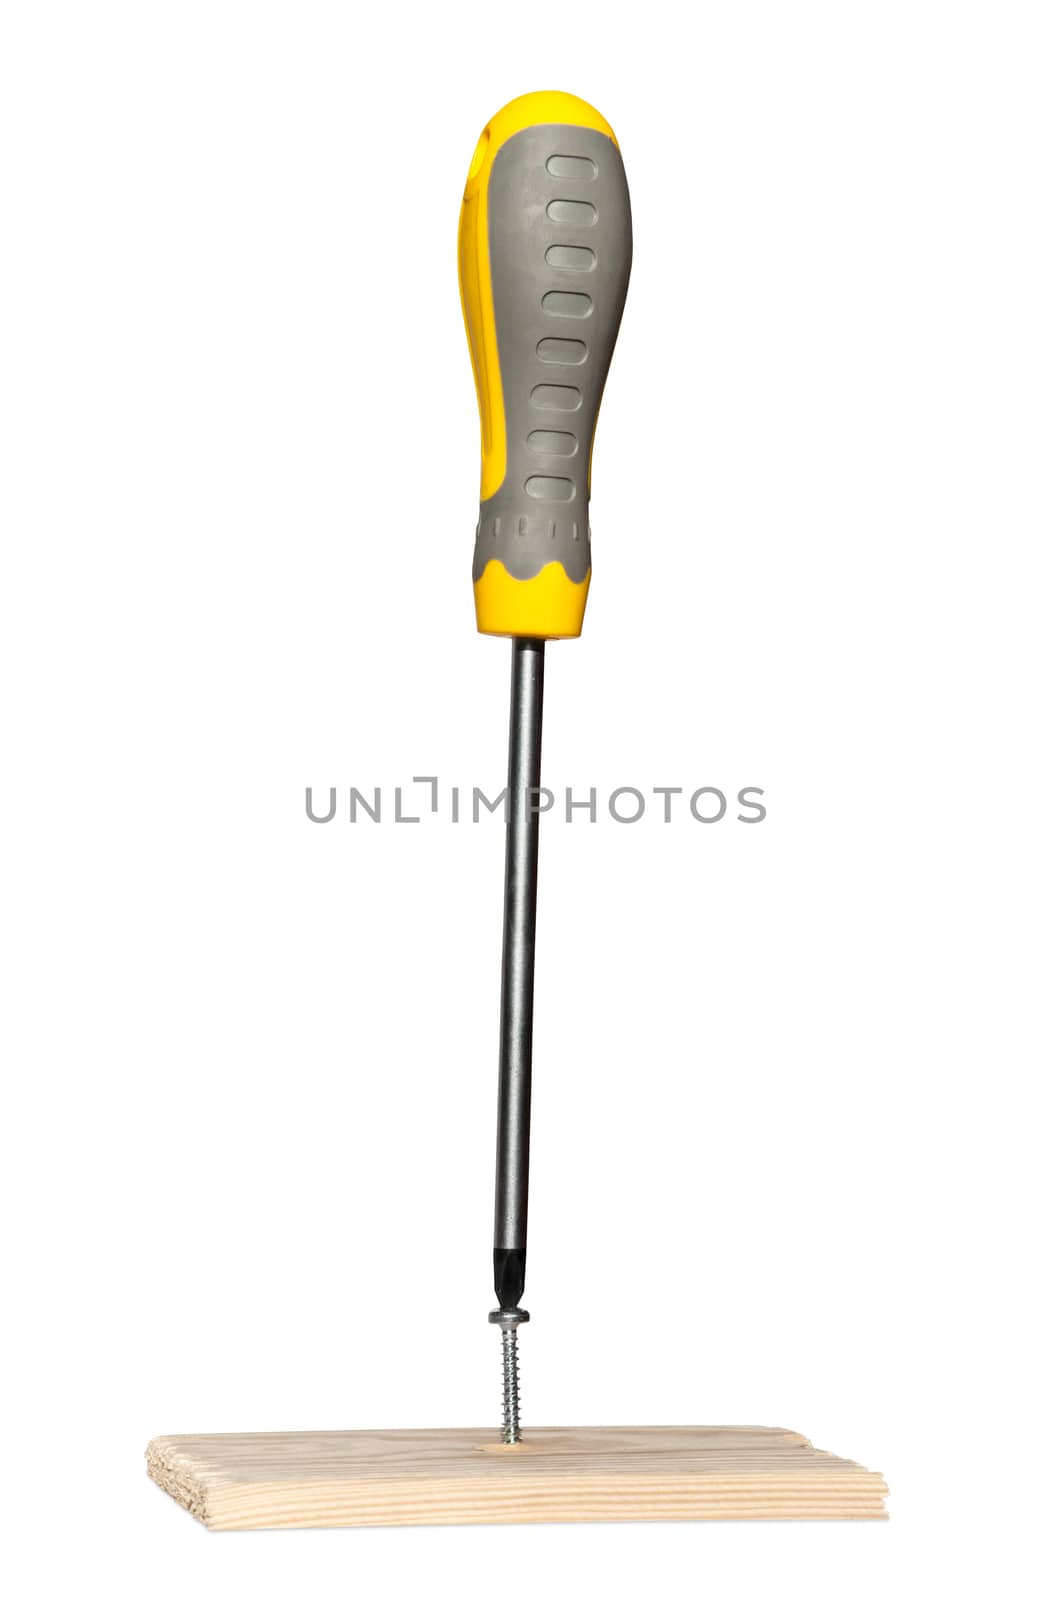 Screwdriving screw isolated over white background.